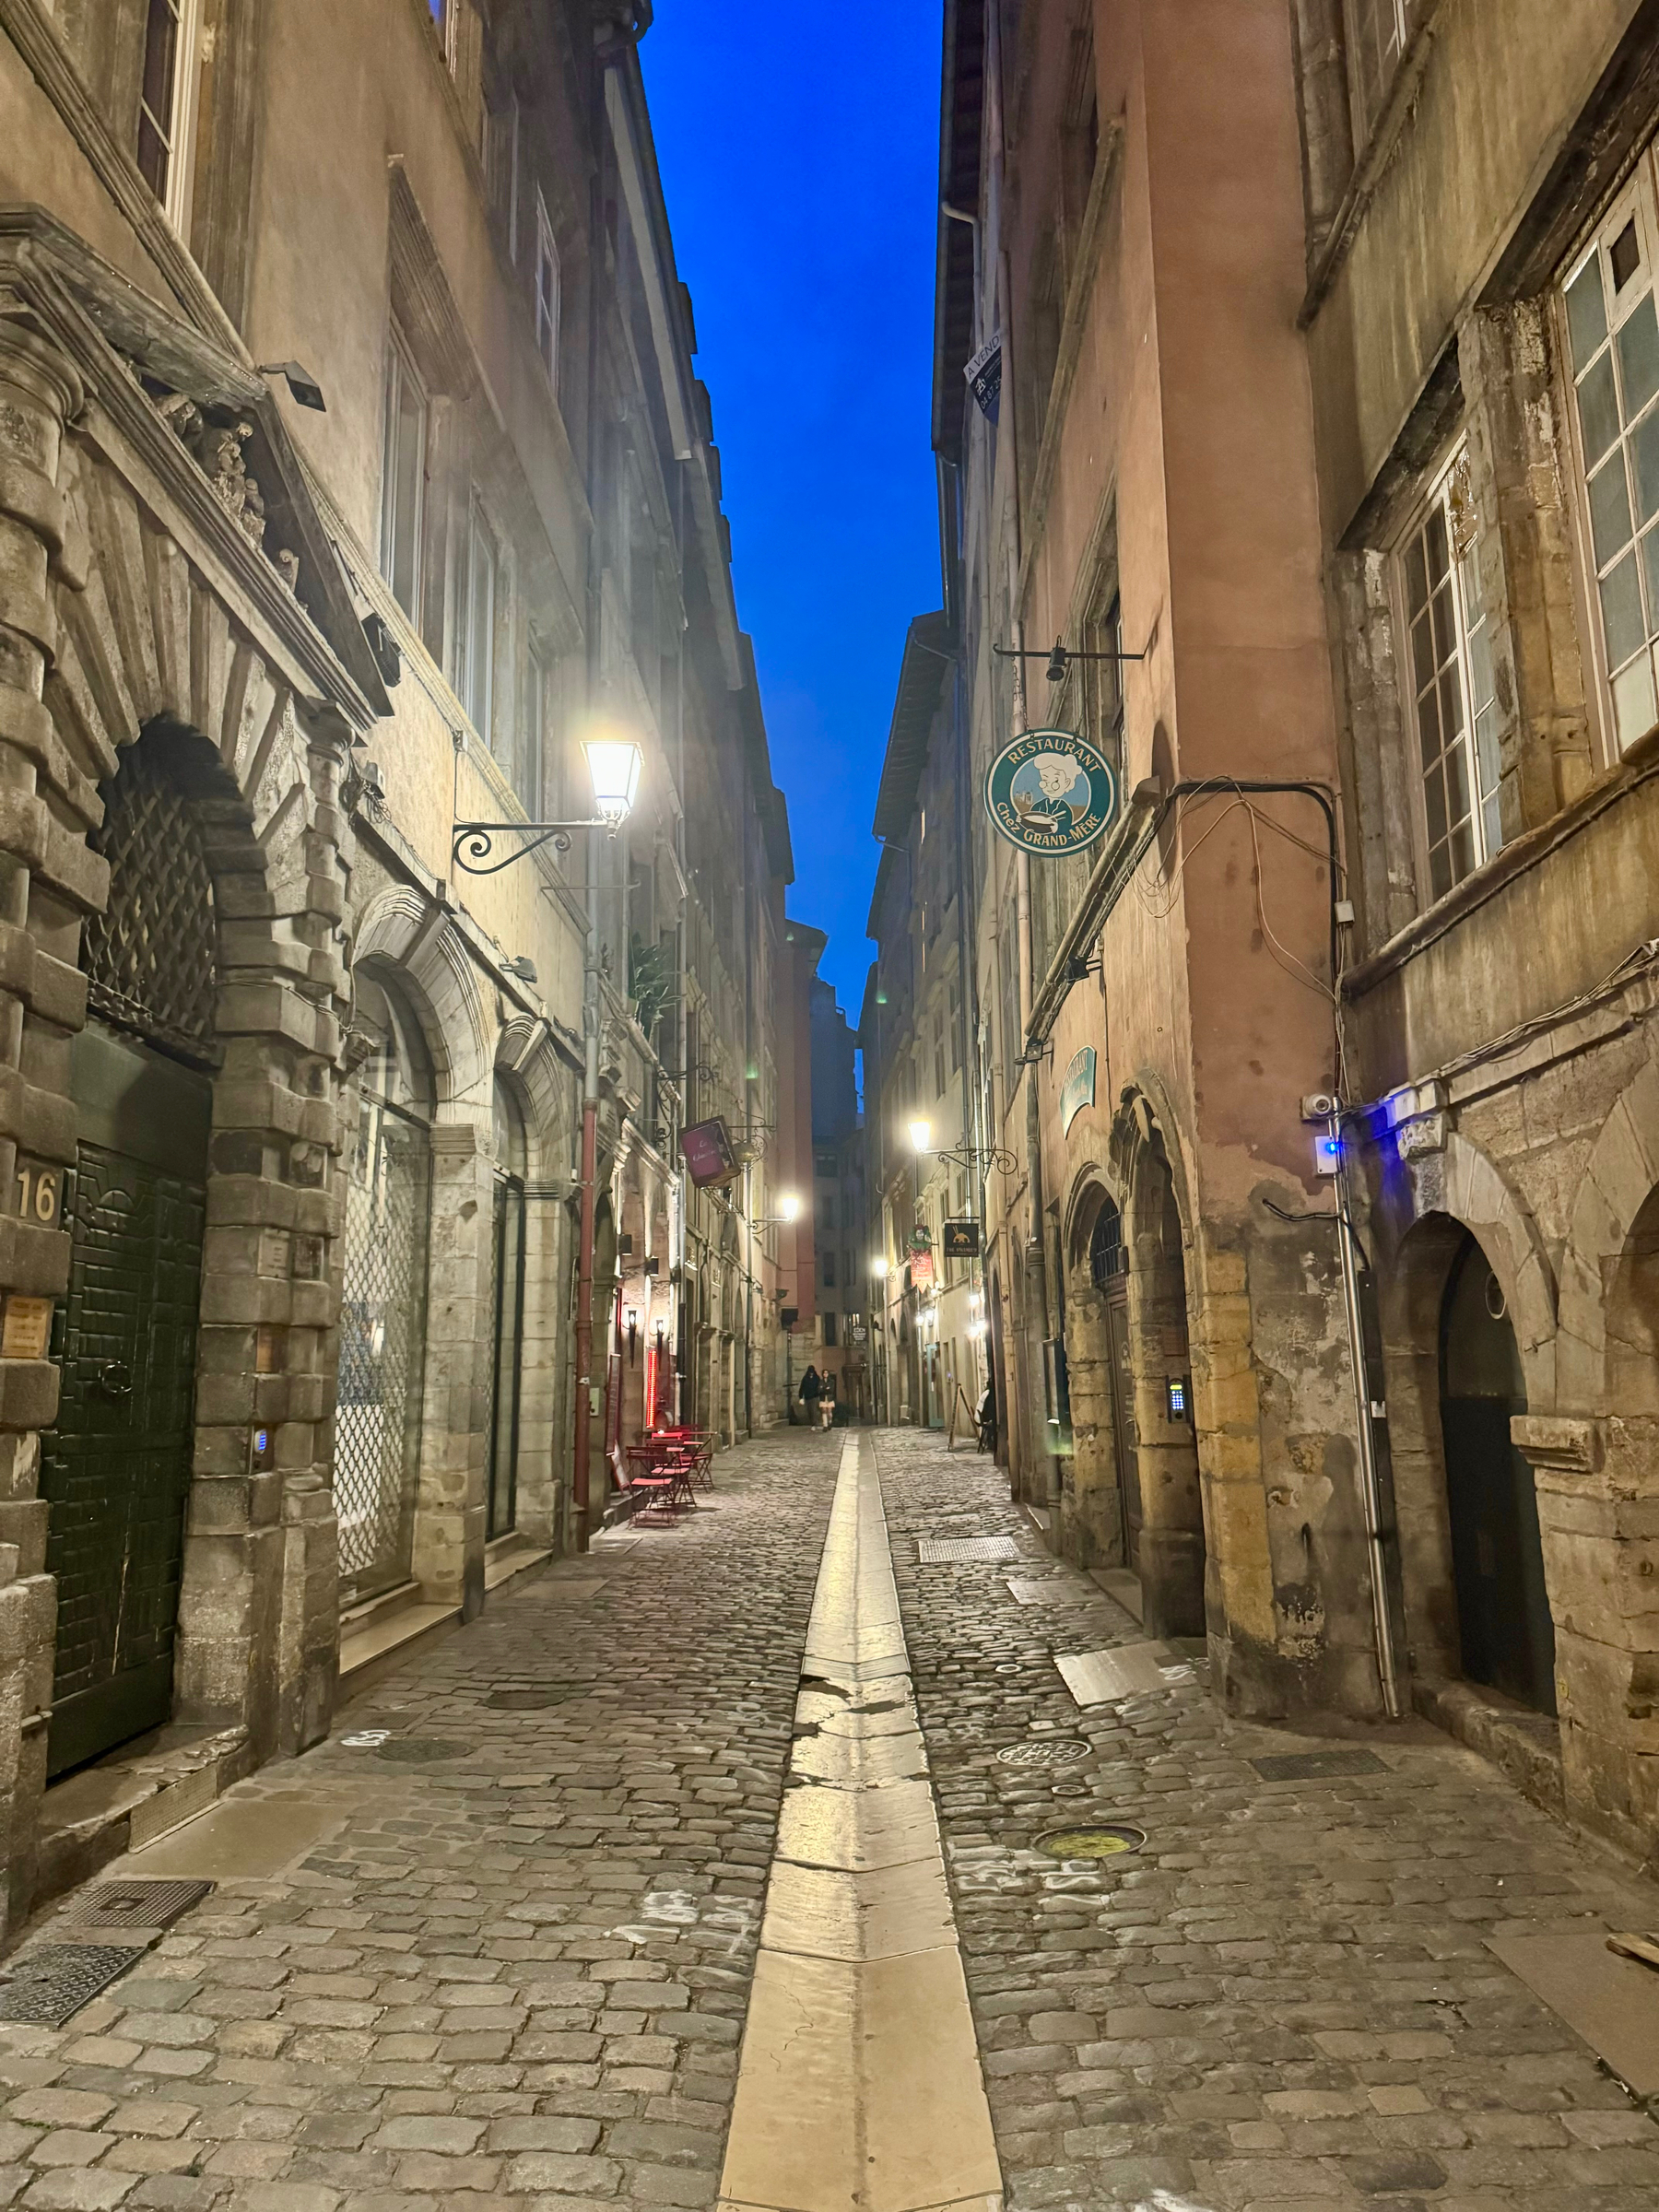 A narrow cobblestone street lined with old buildings and illuminated by street lamps at twilight, signs for businesses hang on walls, and a few people are visible in the distance.